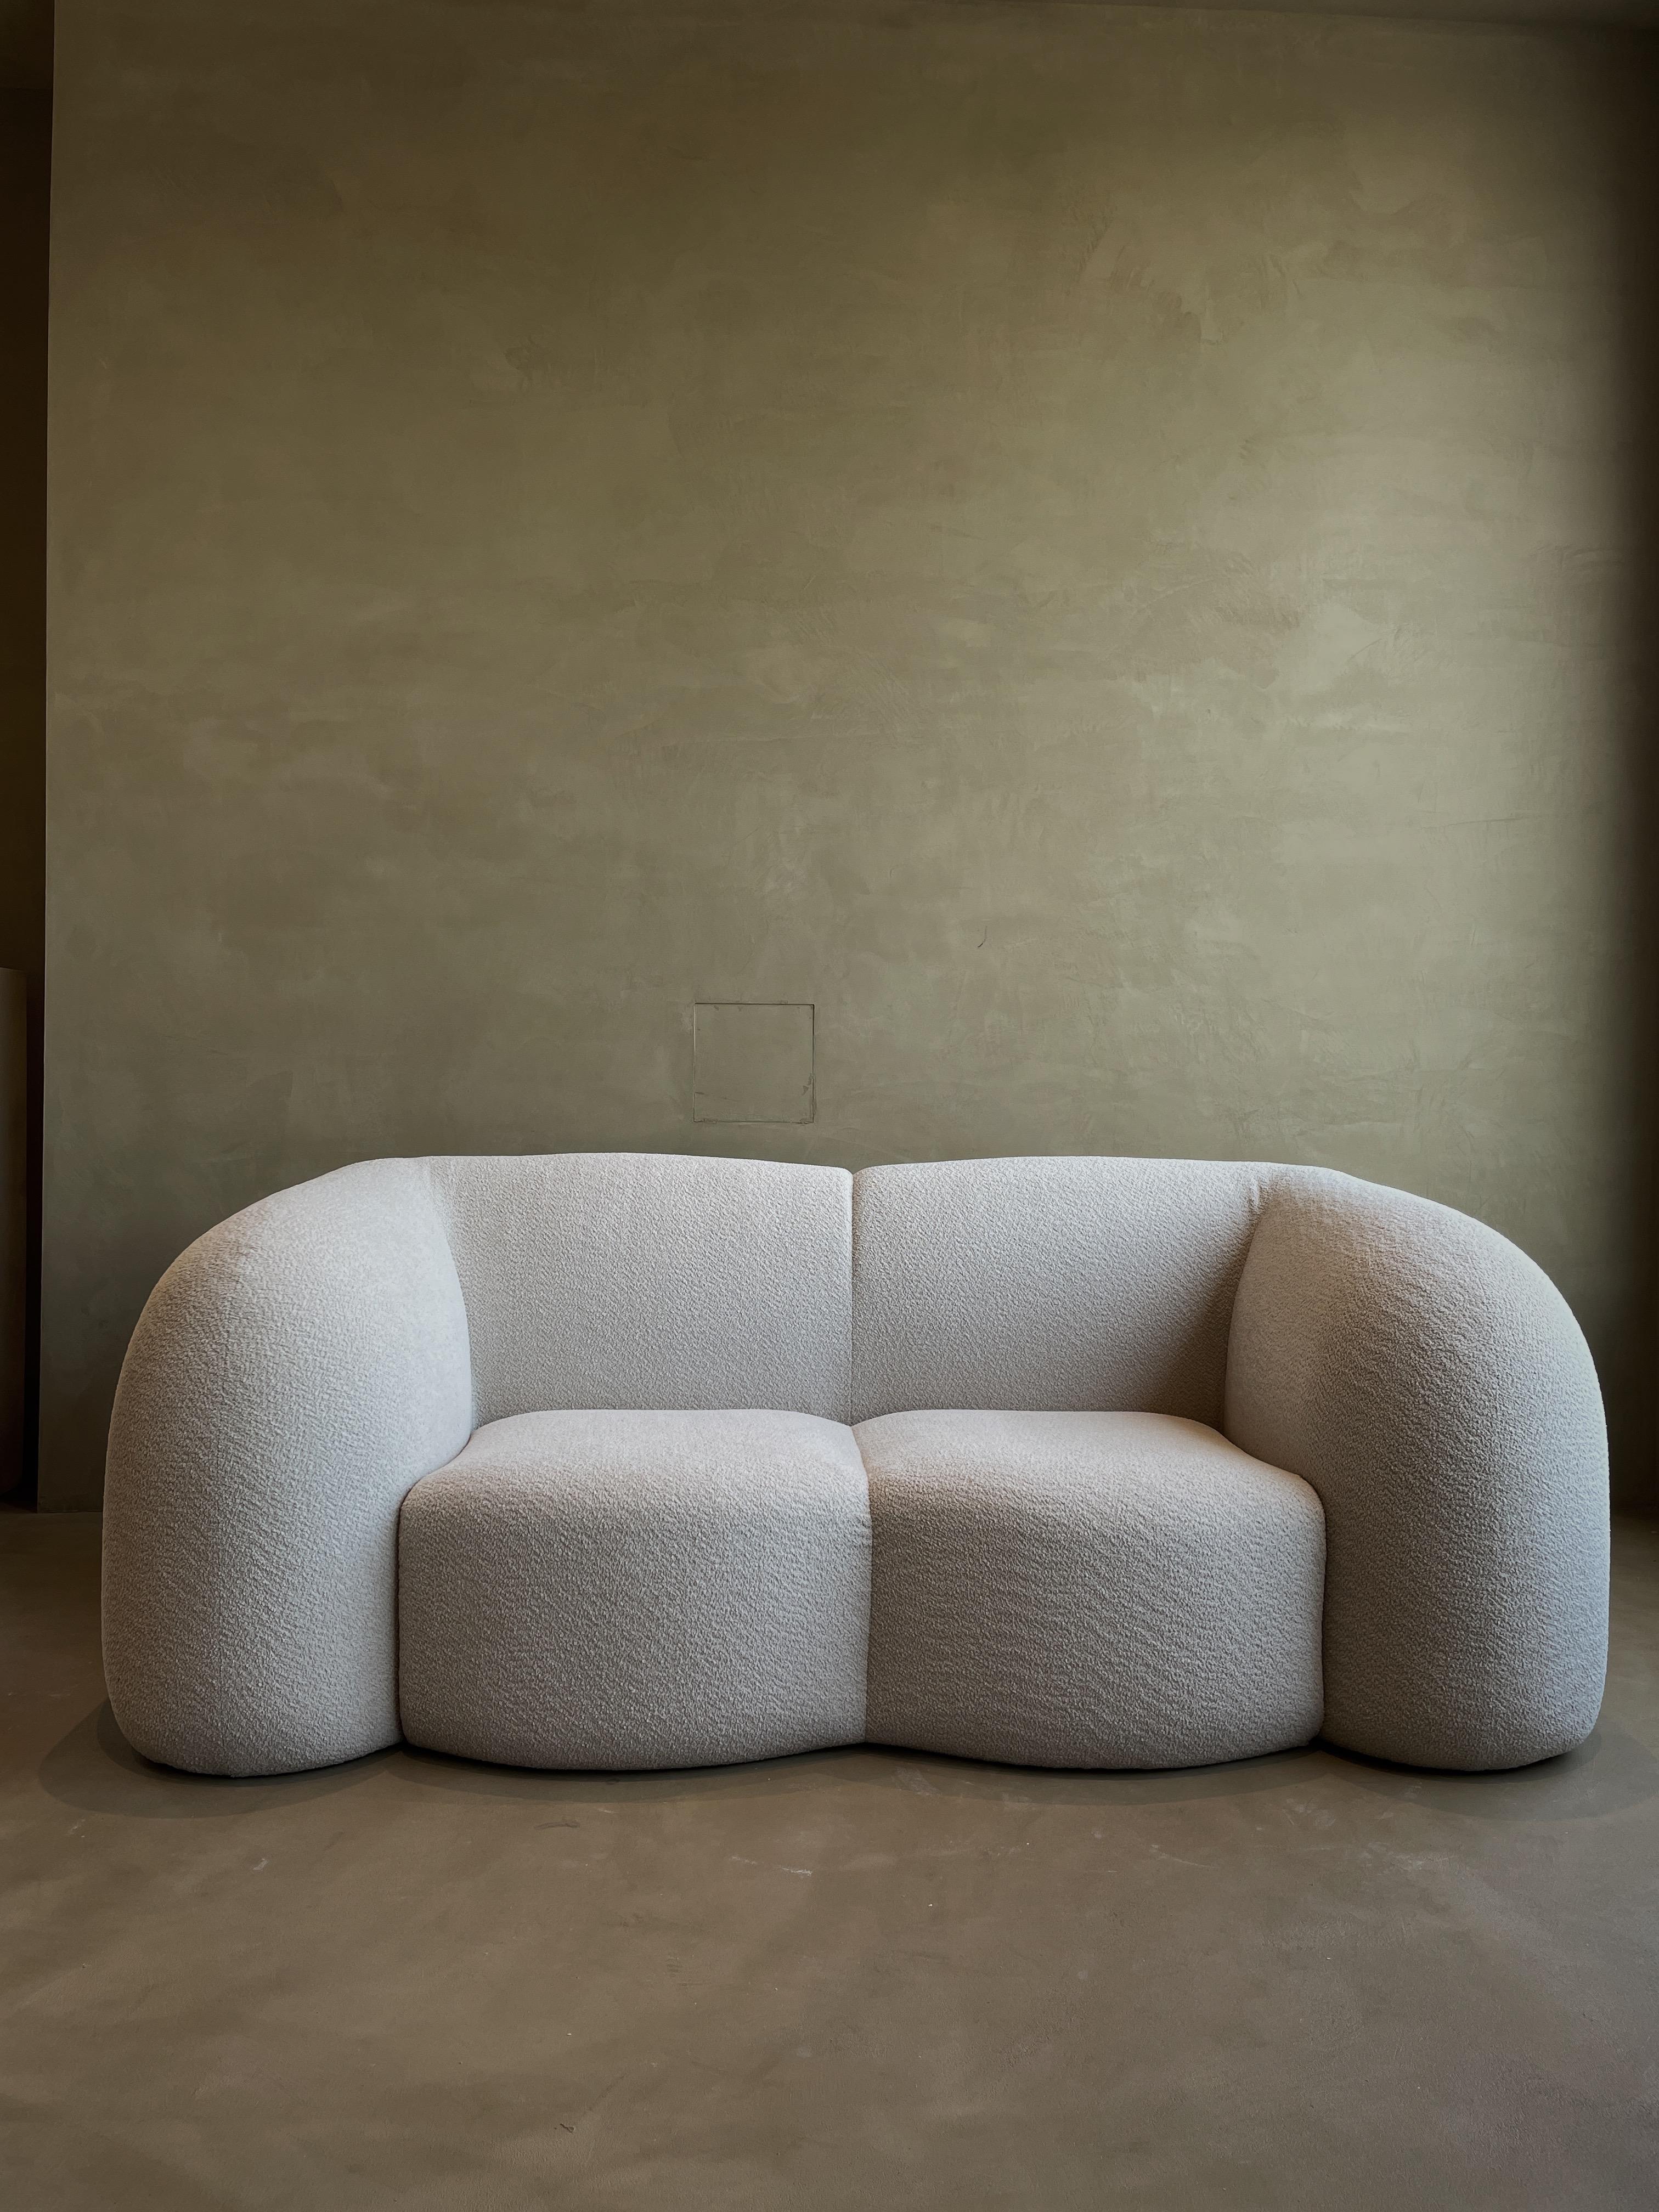 Marshmallow sofa by kar
Dimensions: W 213.5 x D 103 x H 80 cm
Materials: MDF frame, fabric
Colour can be customized. 

Kar, is the root of Sanskrit Karma, meaning karmic repetition. We seek the cause and effect in aesthetics, inspired from the past,